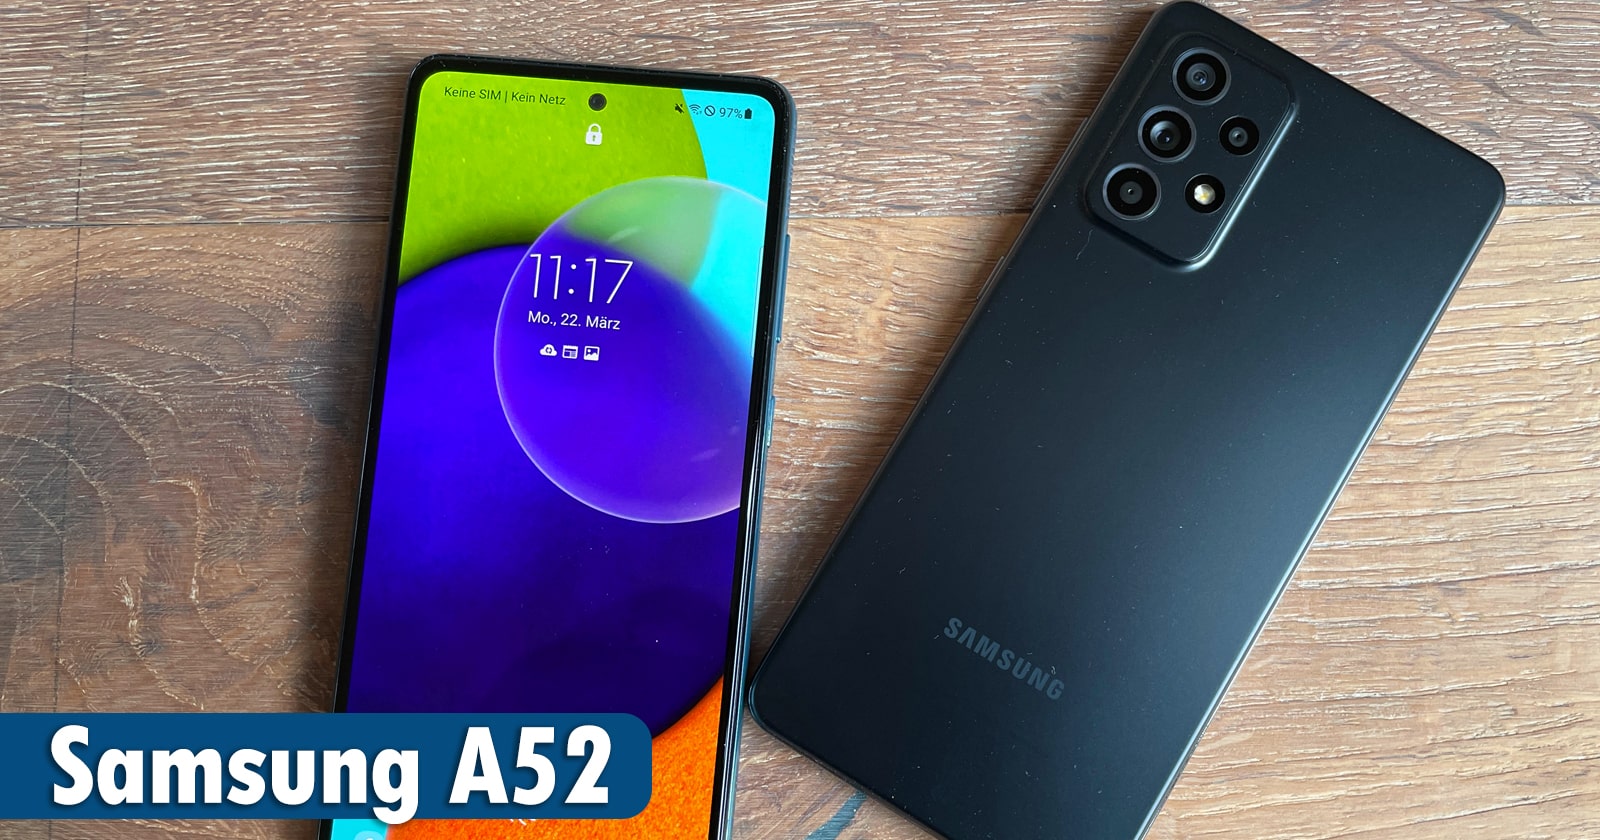 What Is the Difference Between Samsung A32 and A52?